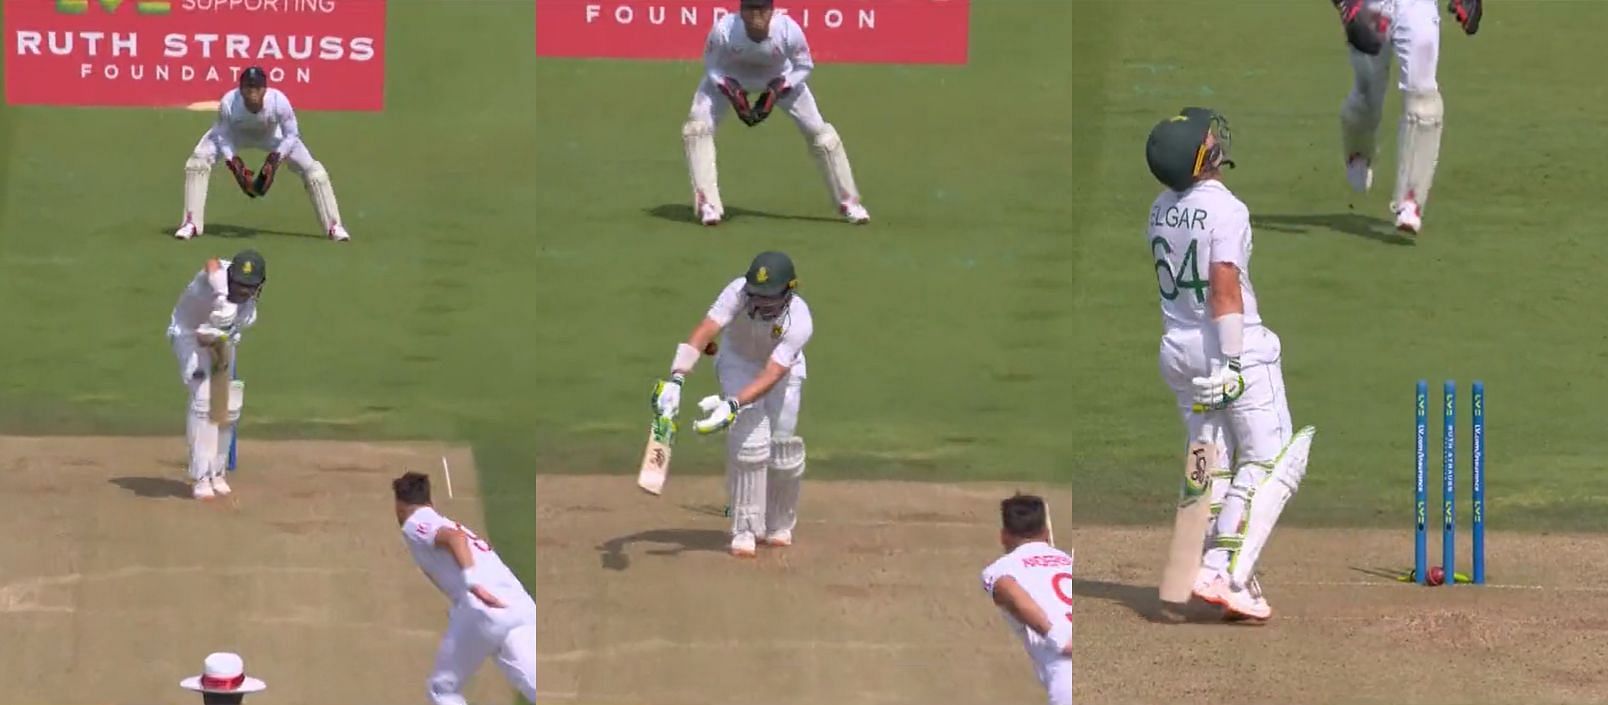 Screenshots of Dean Elgar&rsquo;s wicket on Day 2 of the Lord&rsquo;s Test. Credits/ ECB